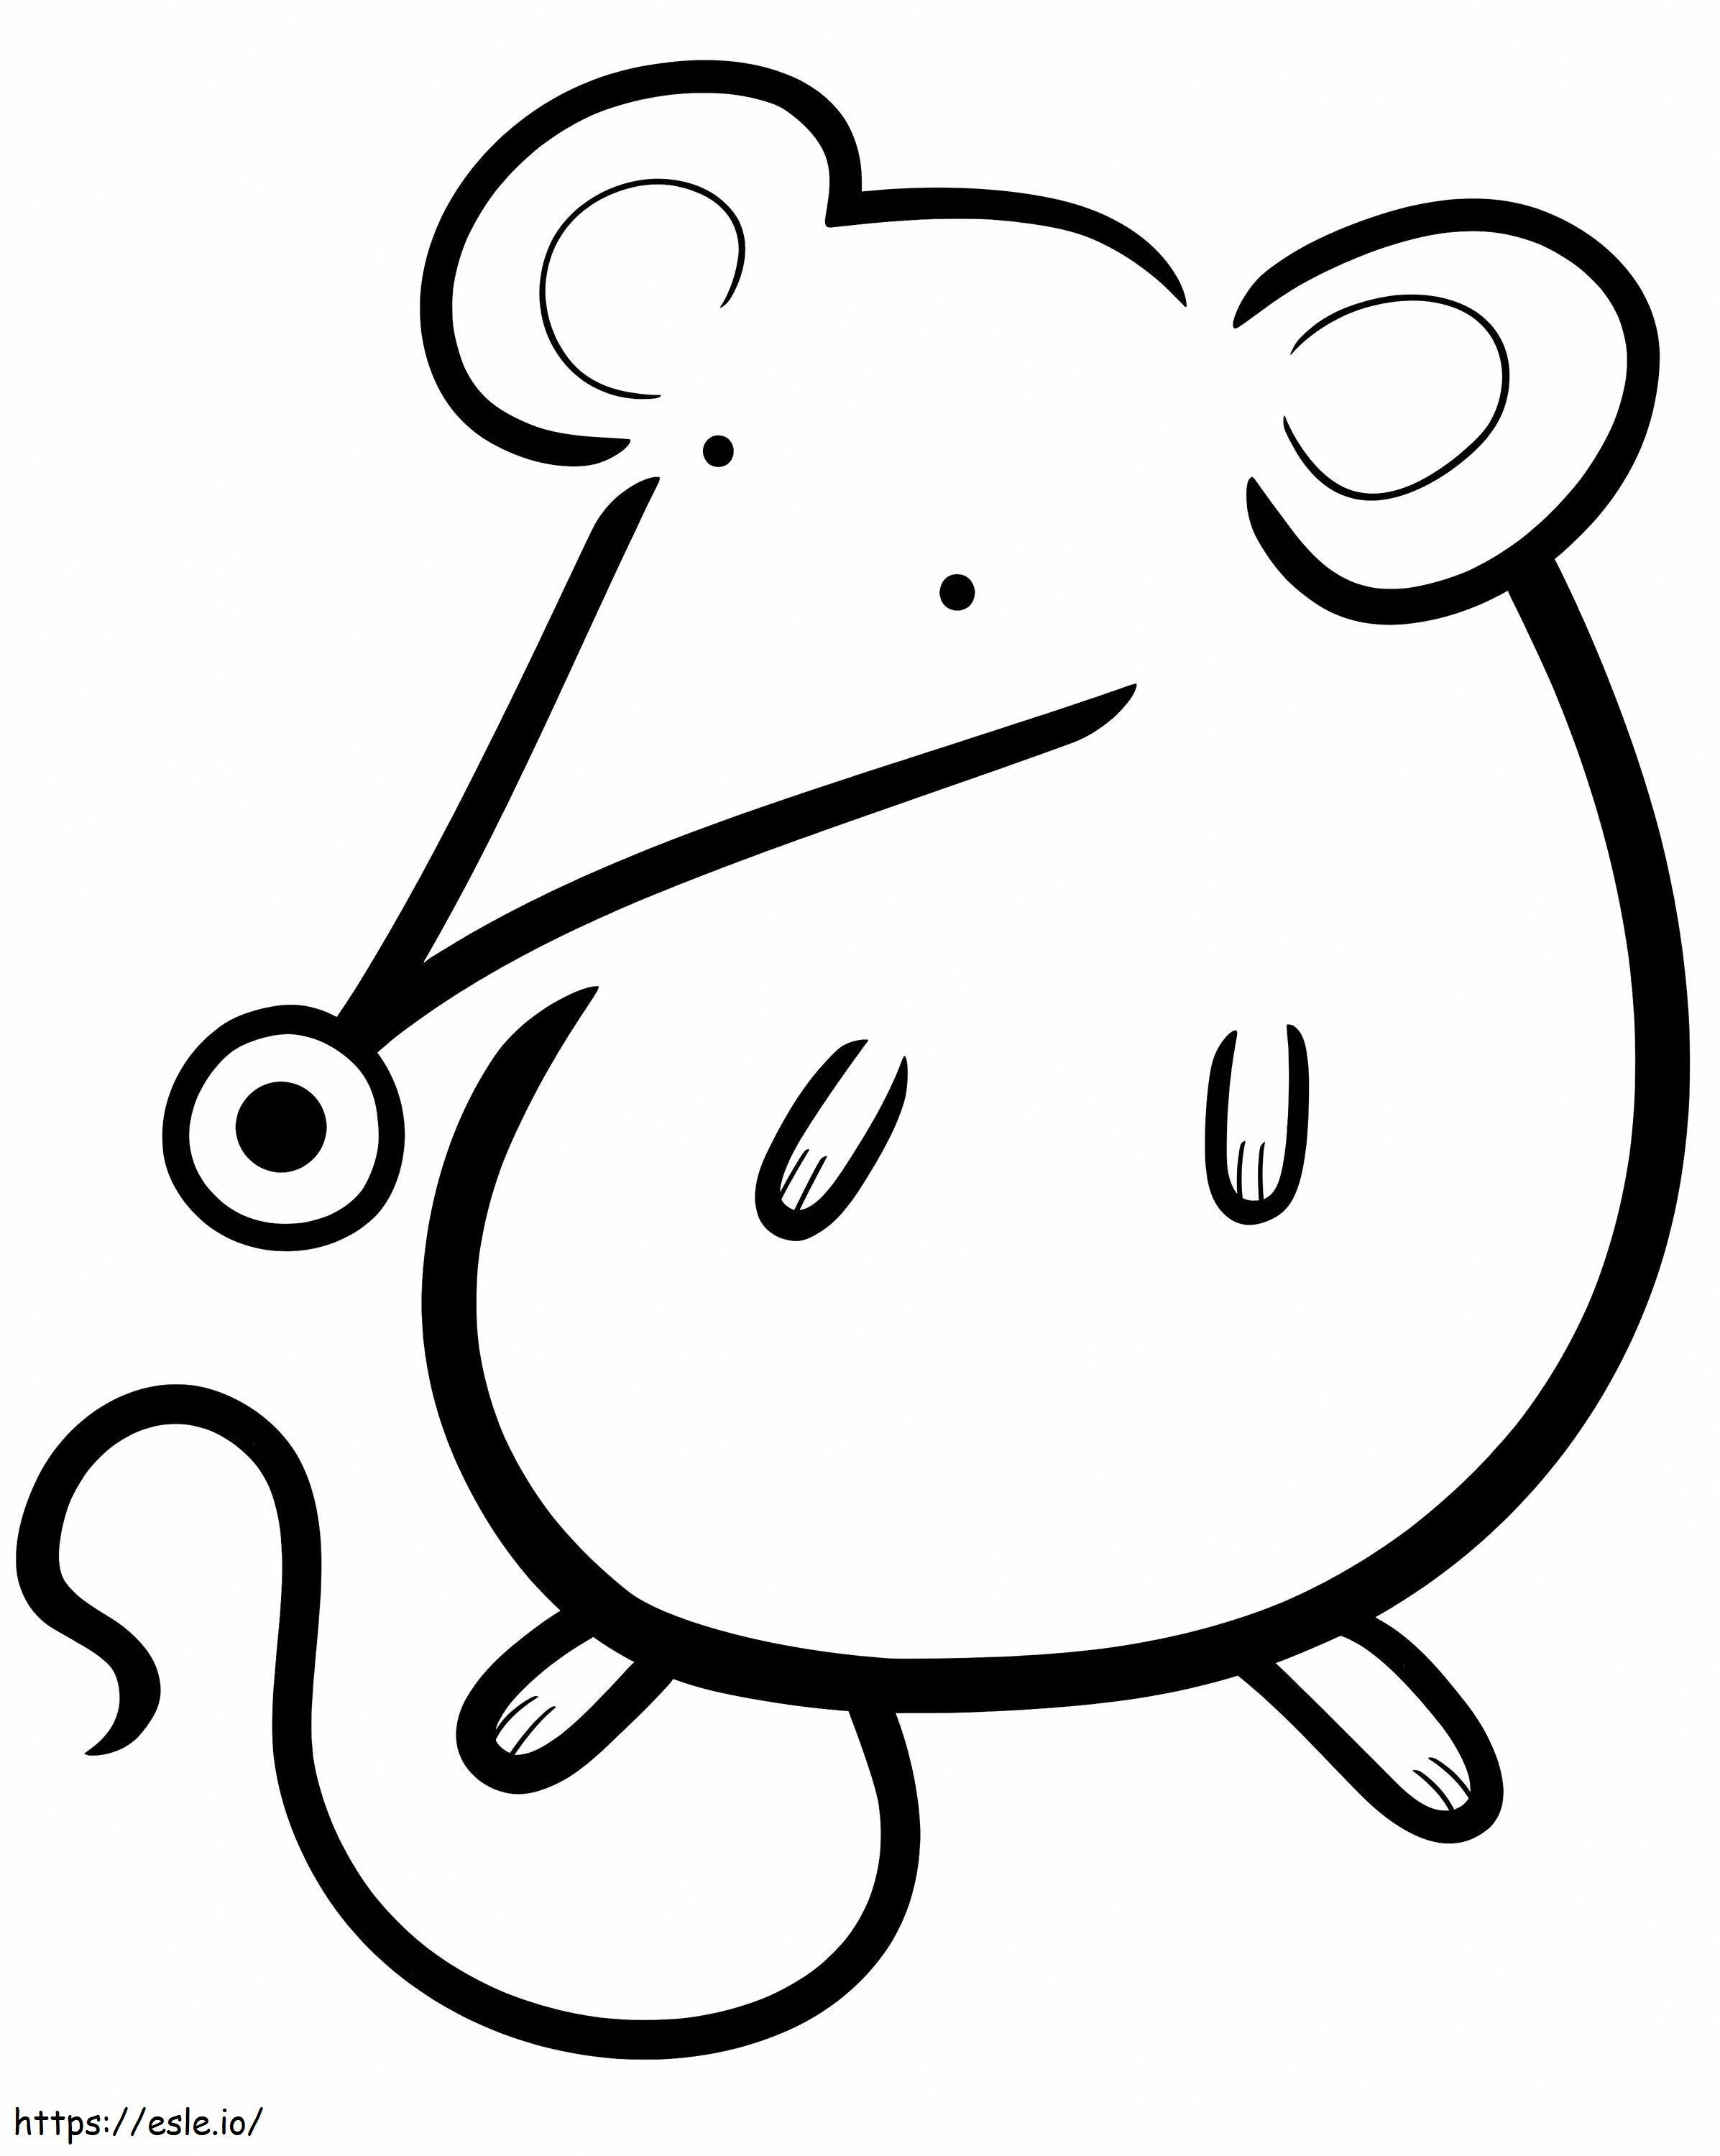 Cute Mouse Cartoon For Coloring Book Vector 943082 coloring page